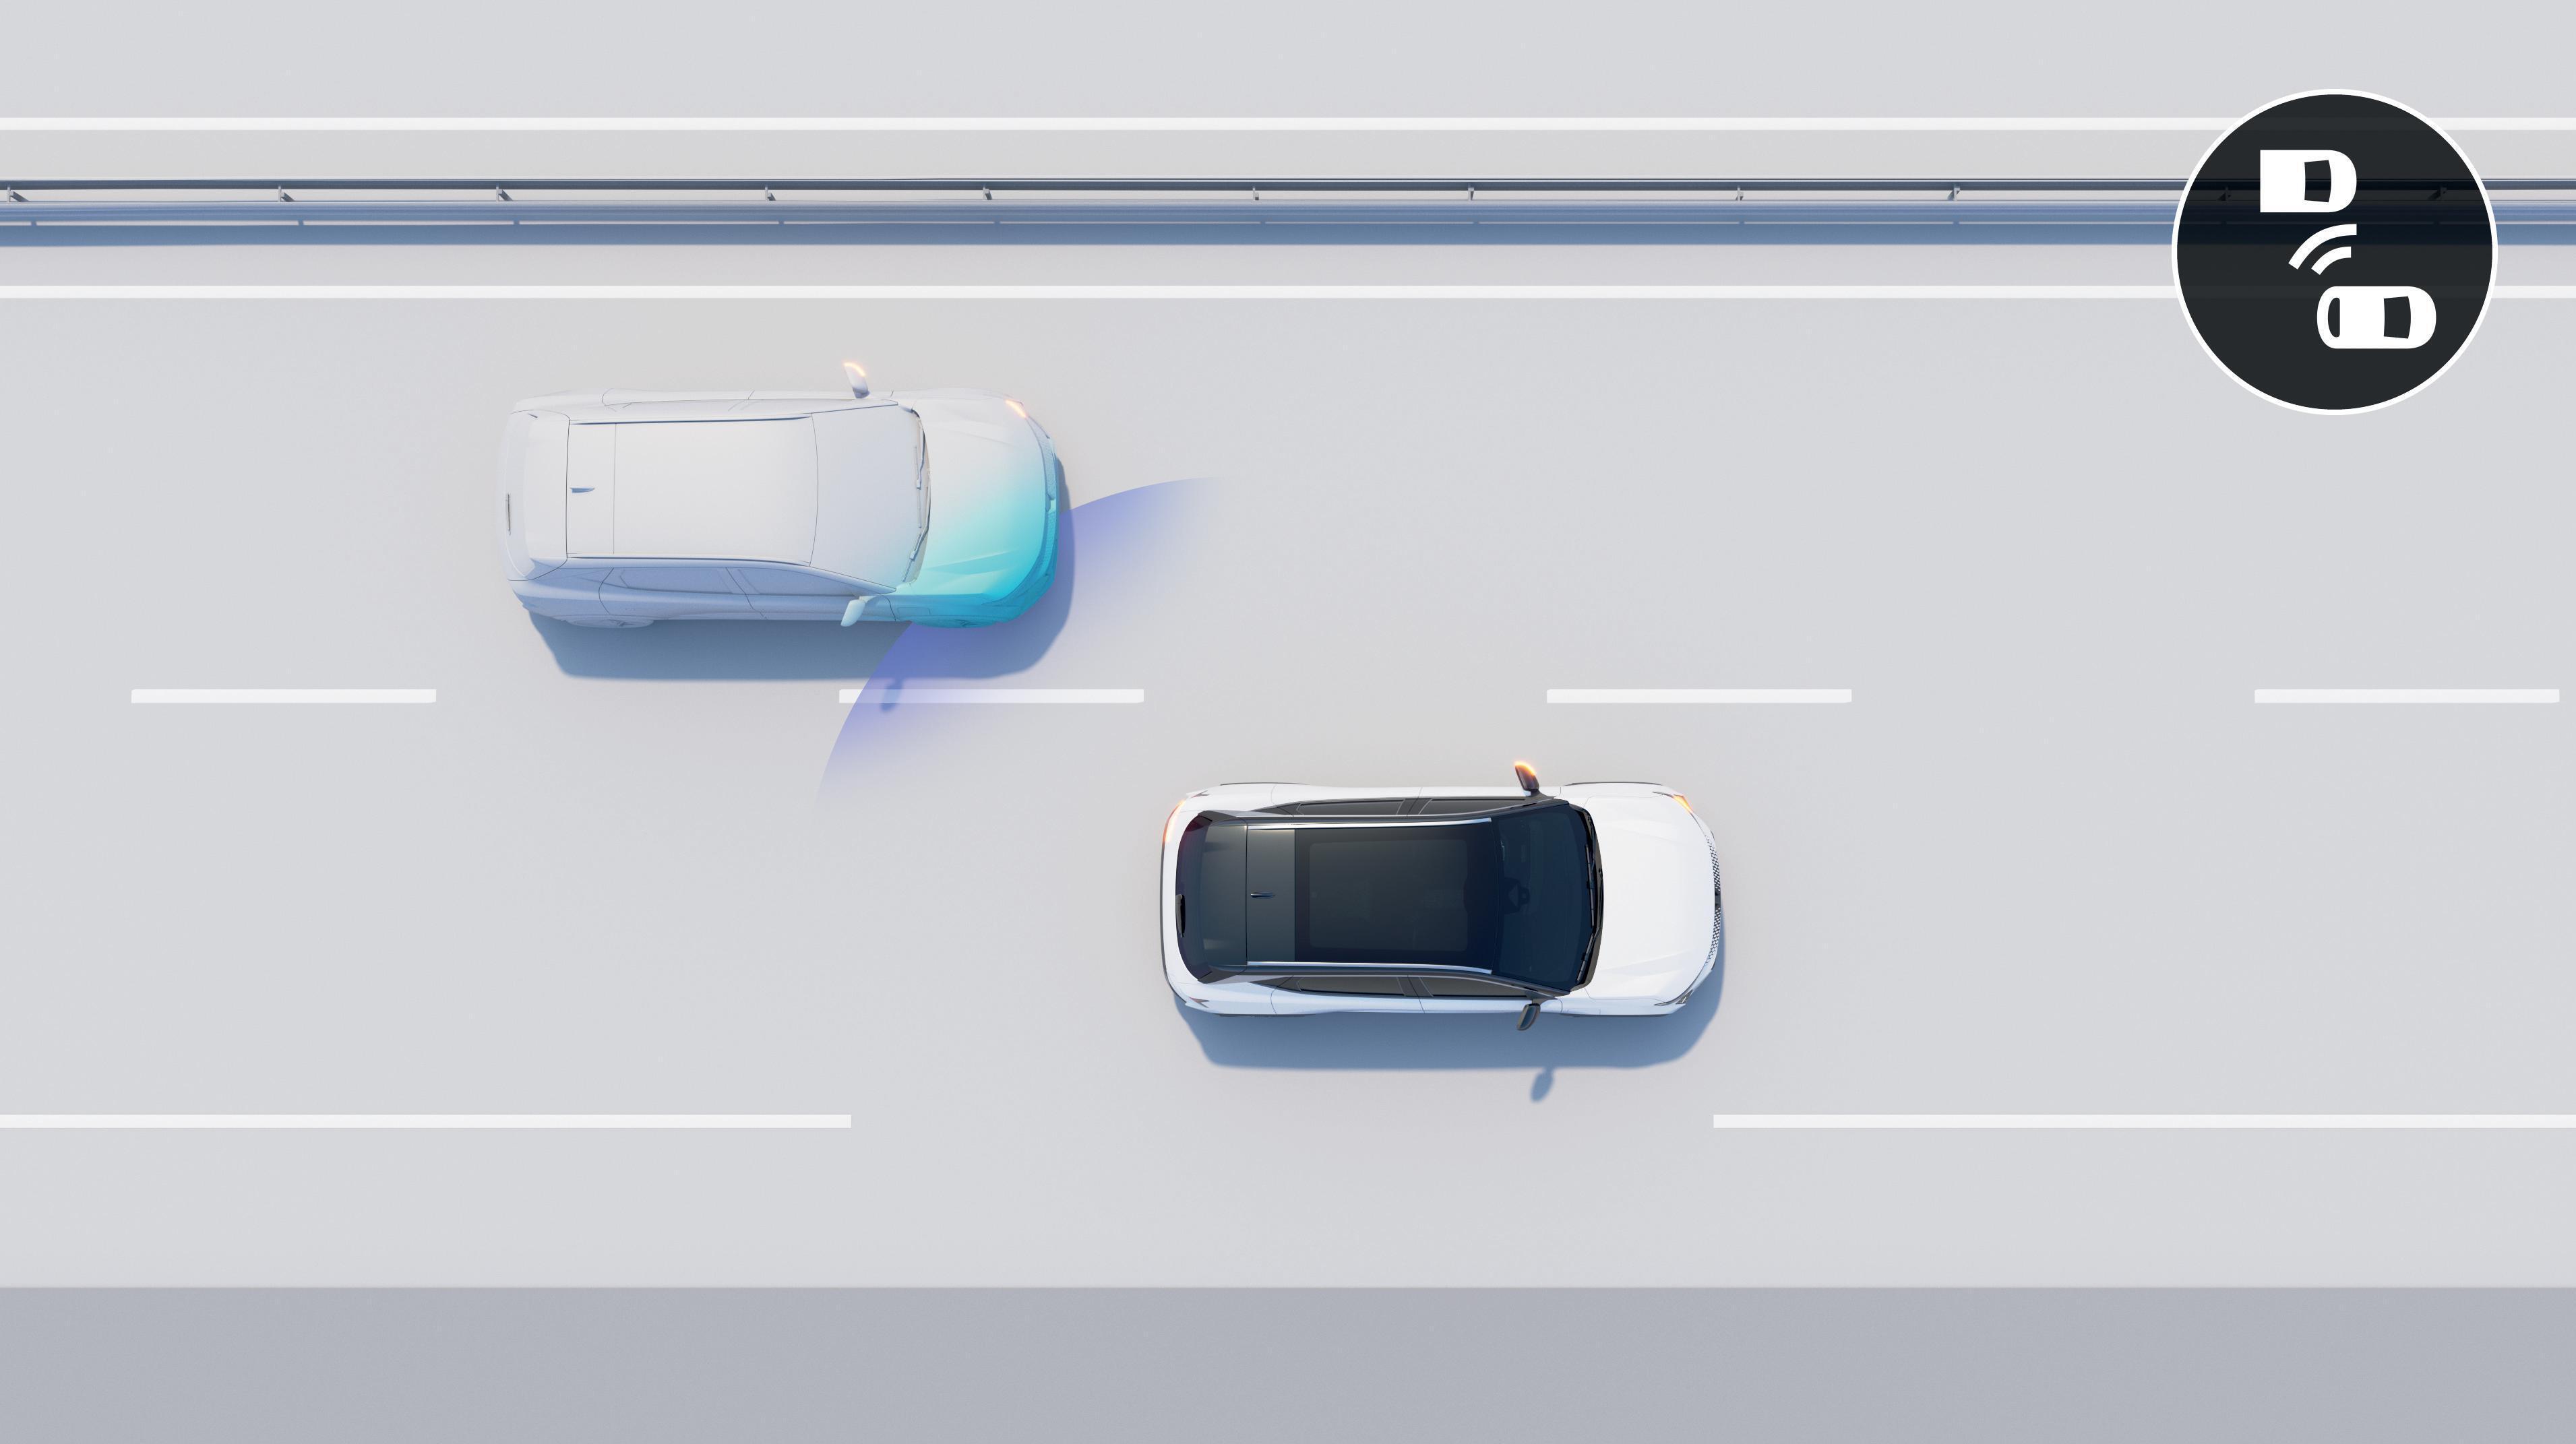 blind spot warning and rear detection with emergency lane keeping assist